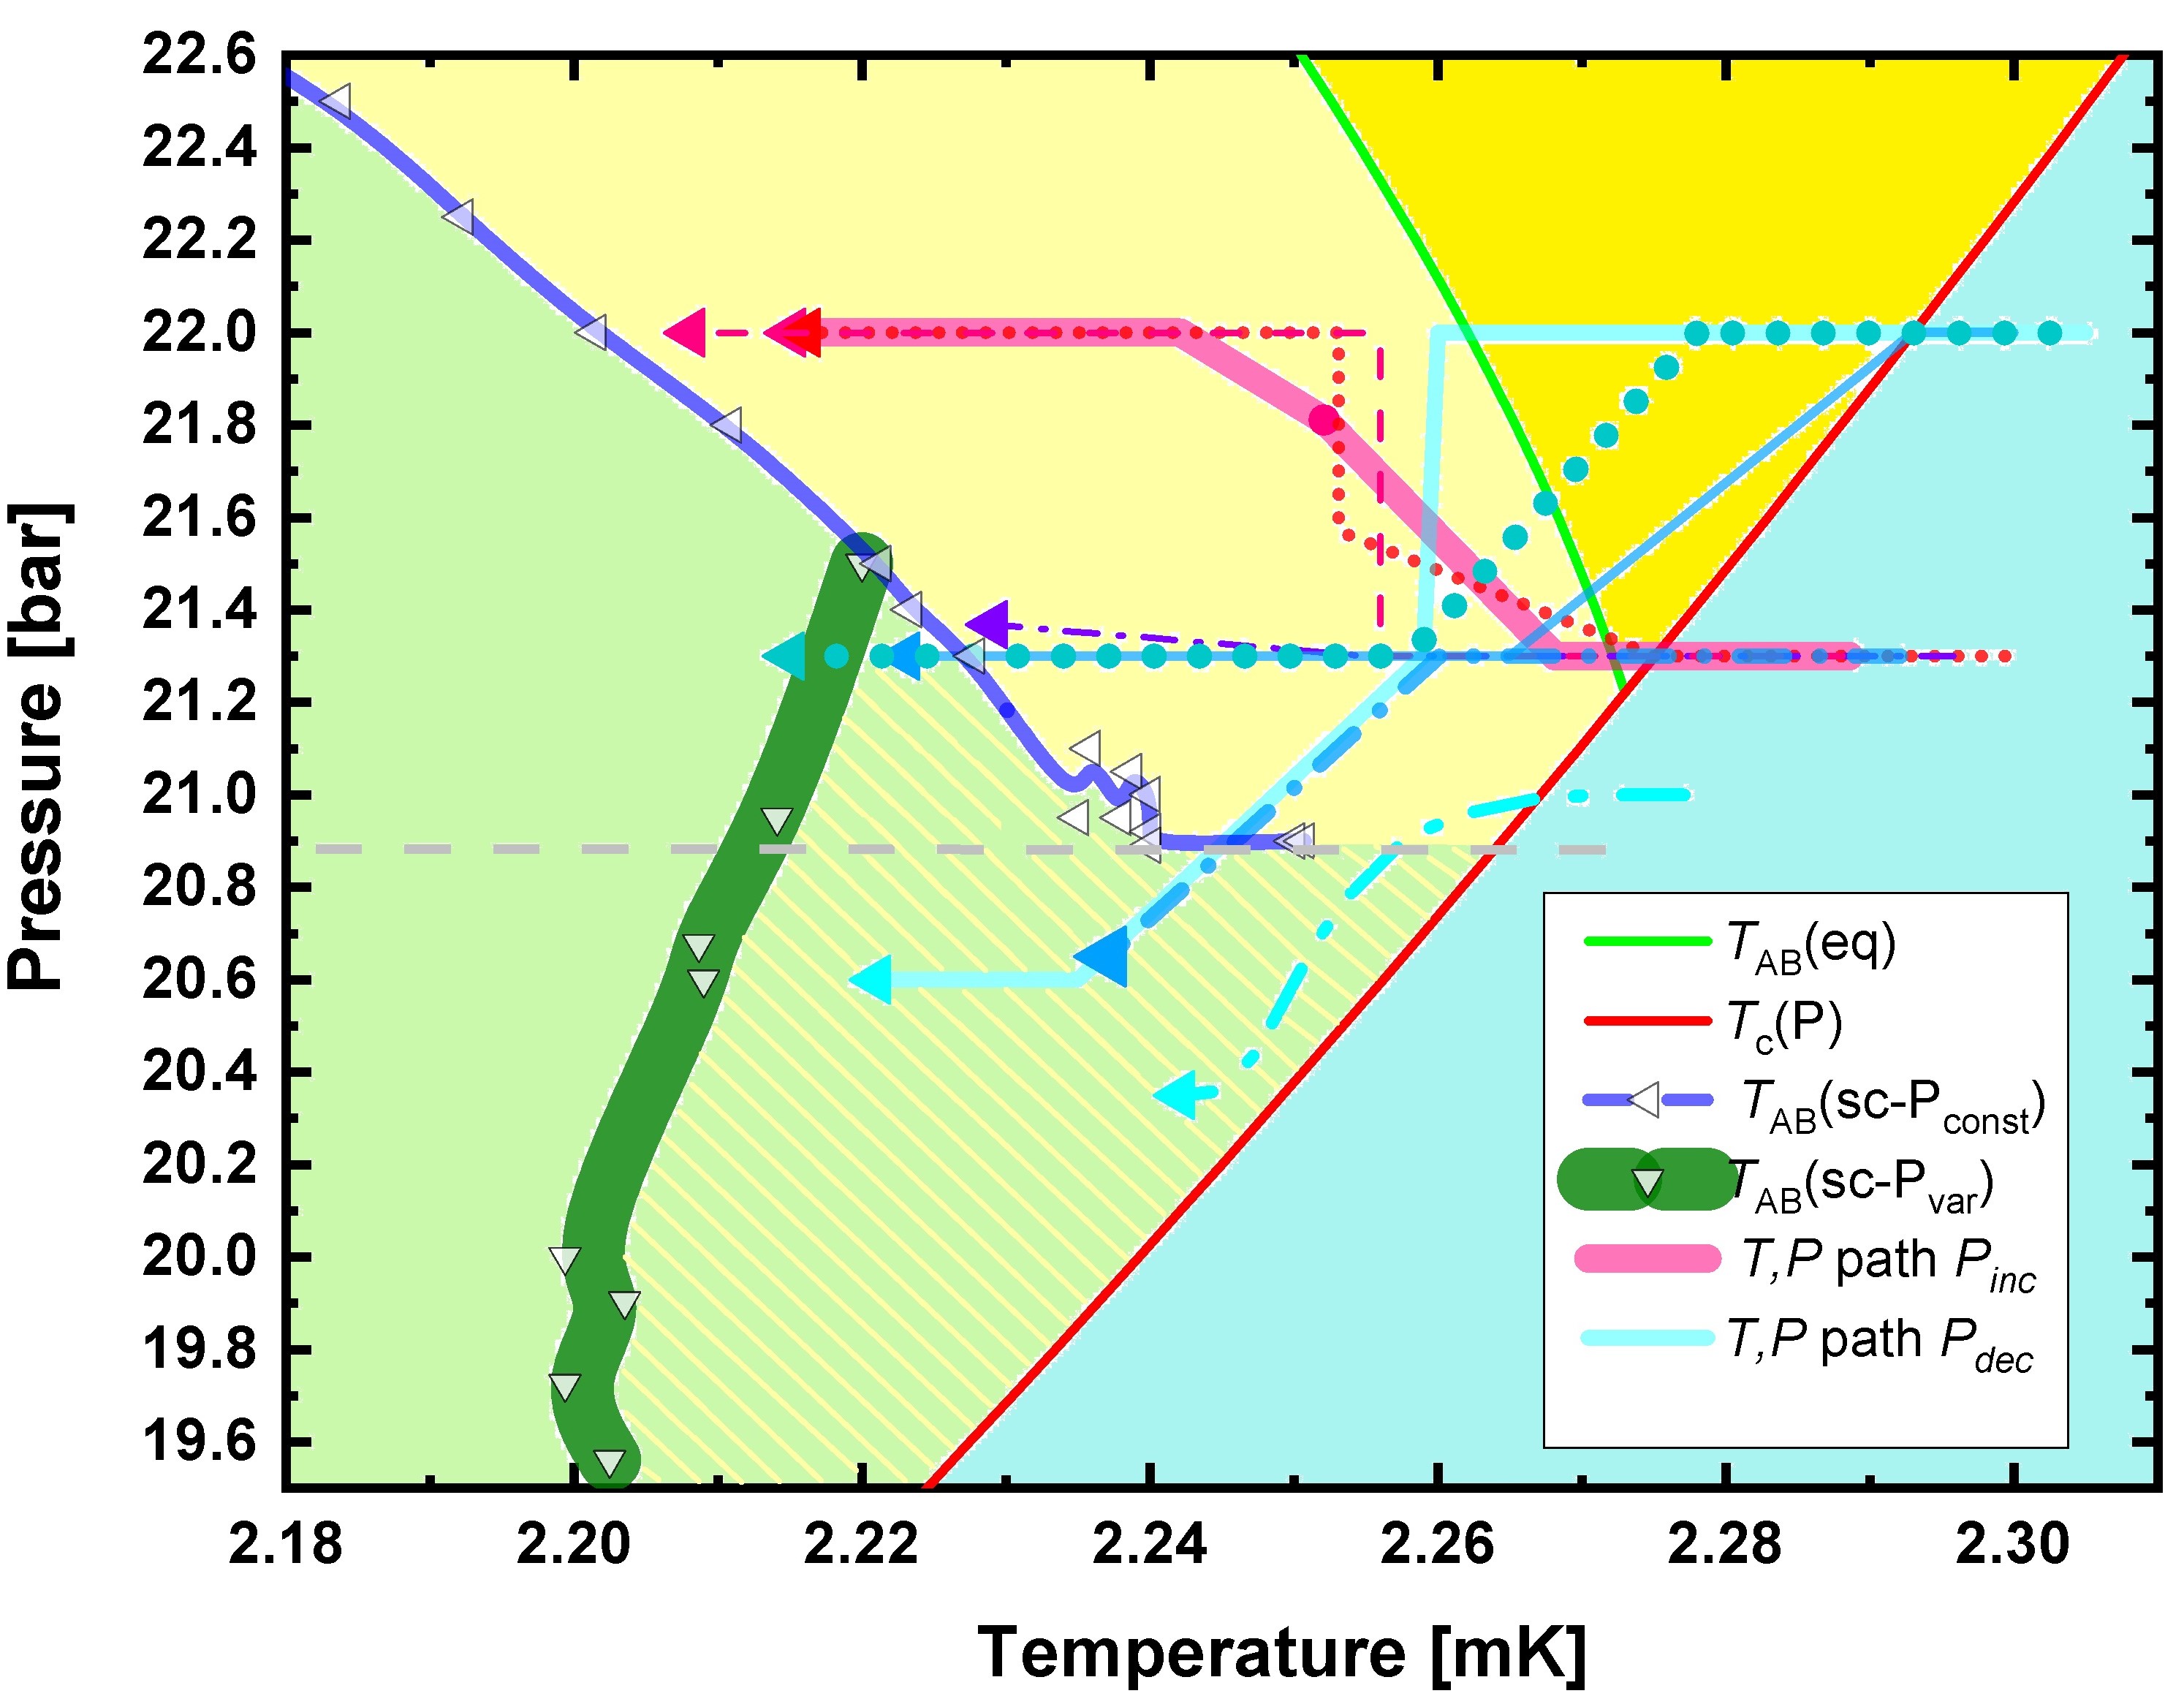 Shows Equilibrium A phase, supercooled A phase (light yellow) accessed by contstant Pressure cooling, and additional region accessed while changing pressure green/yellow striped region. 